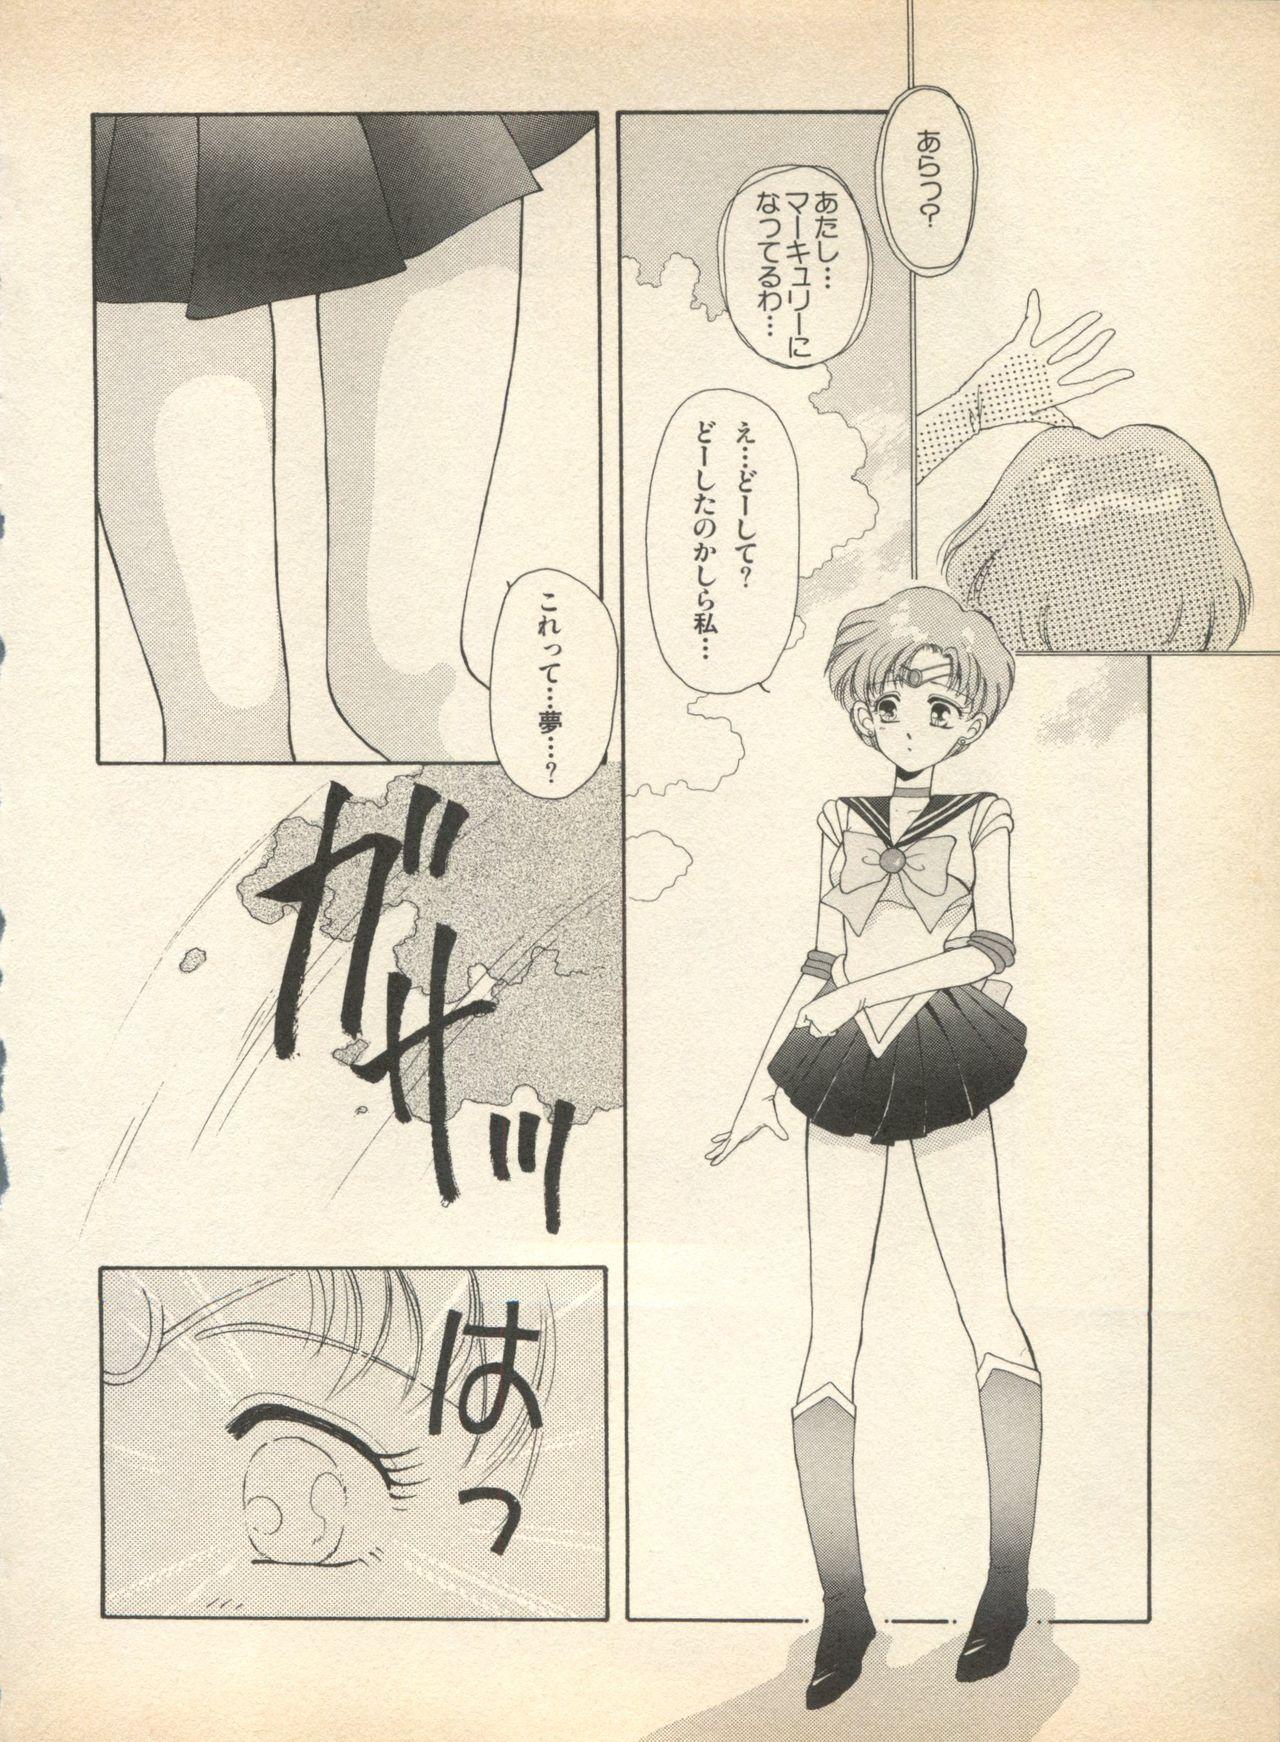 Best Blow Jobs Ever Lunatic Party - Sailor moon Emo Gay - Page 11